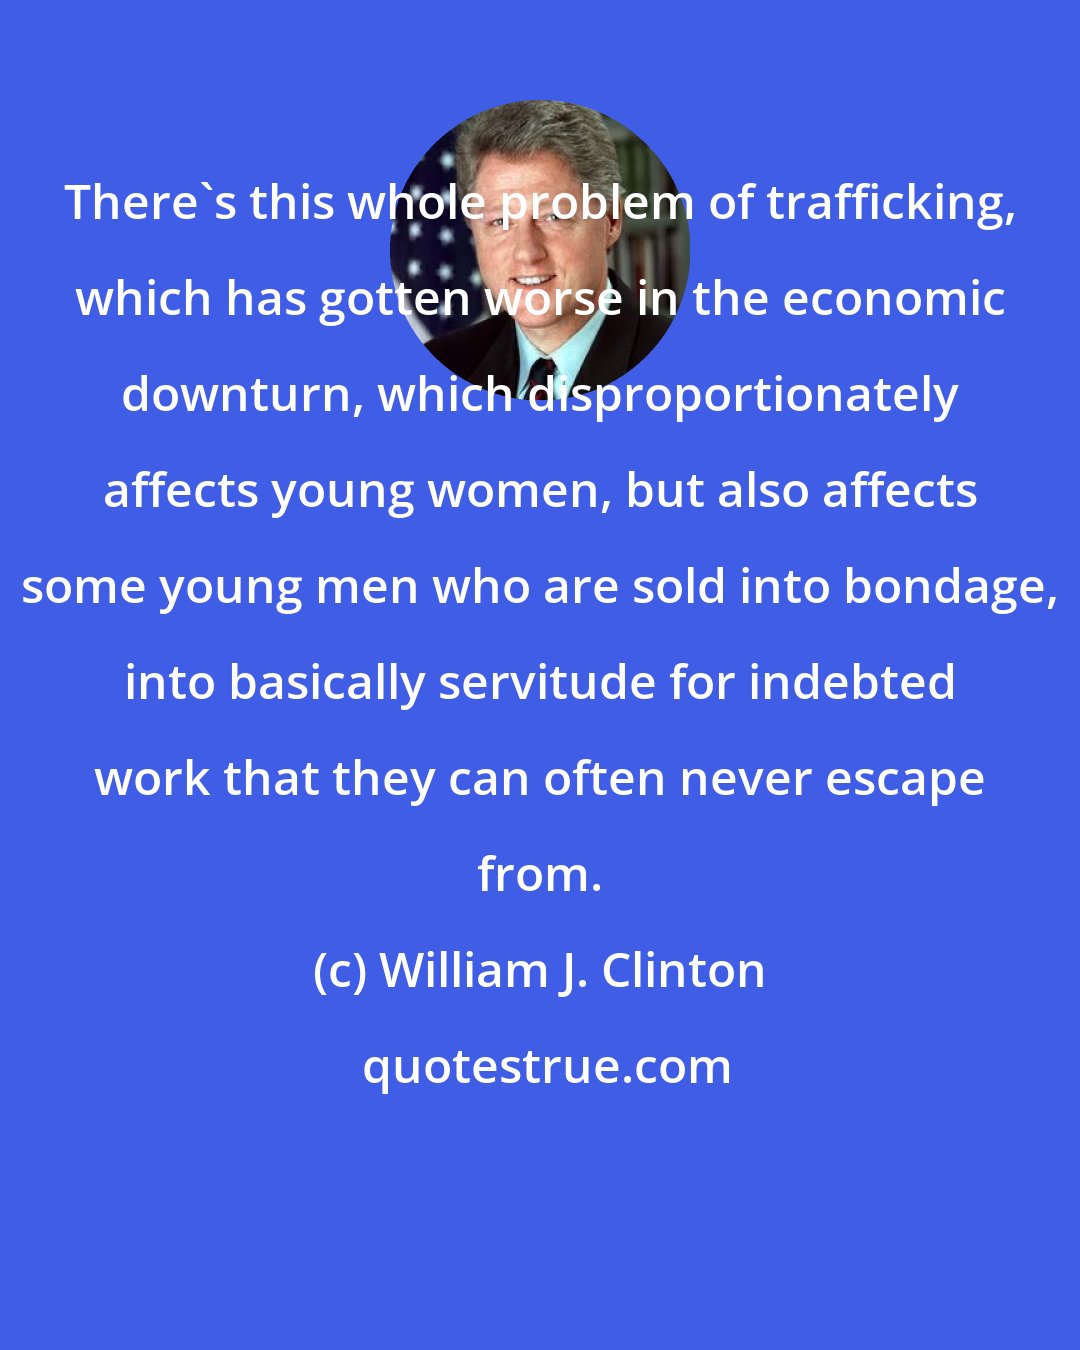 William J. Clinton: There's this whole problem of trafficking, which has gotten worse in the economic downturn, which disproportionately affects young women, but also affects some young men who are sold into bondage, into basically servitude for indebted work that they can often never escape from.